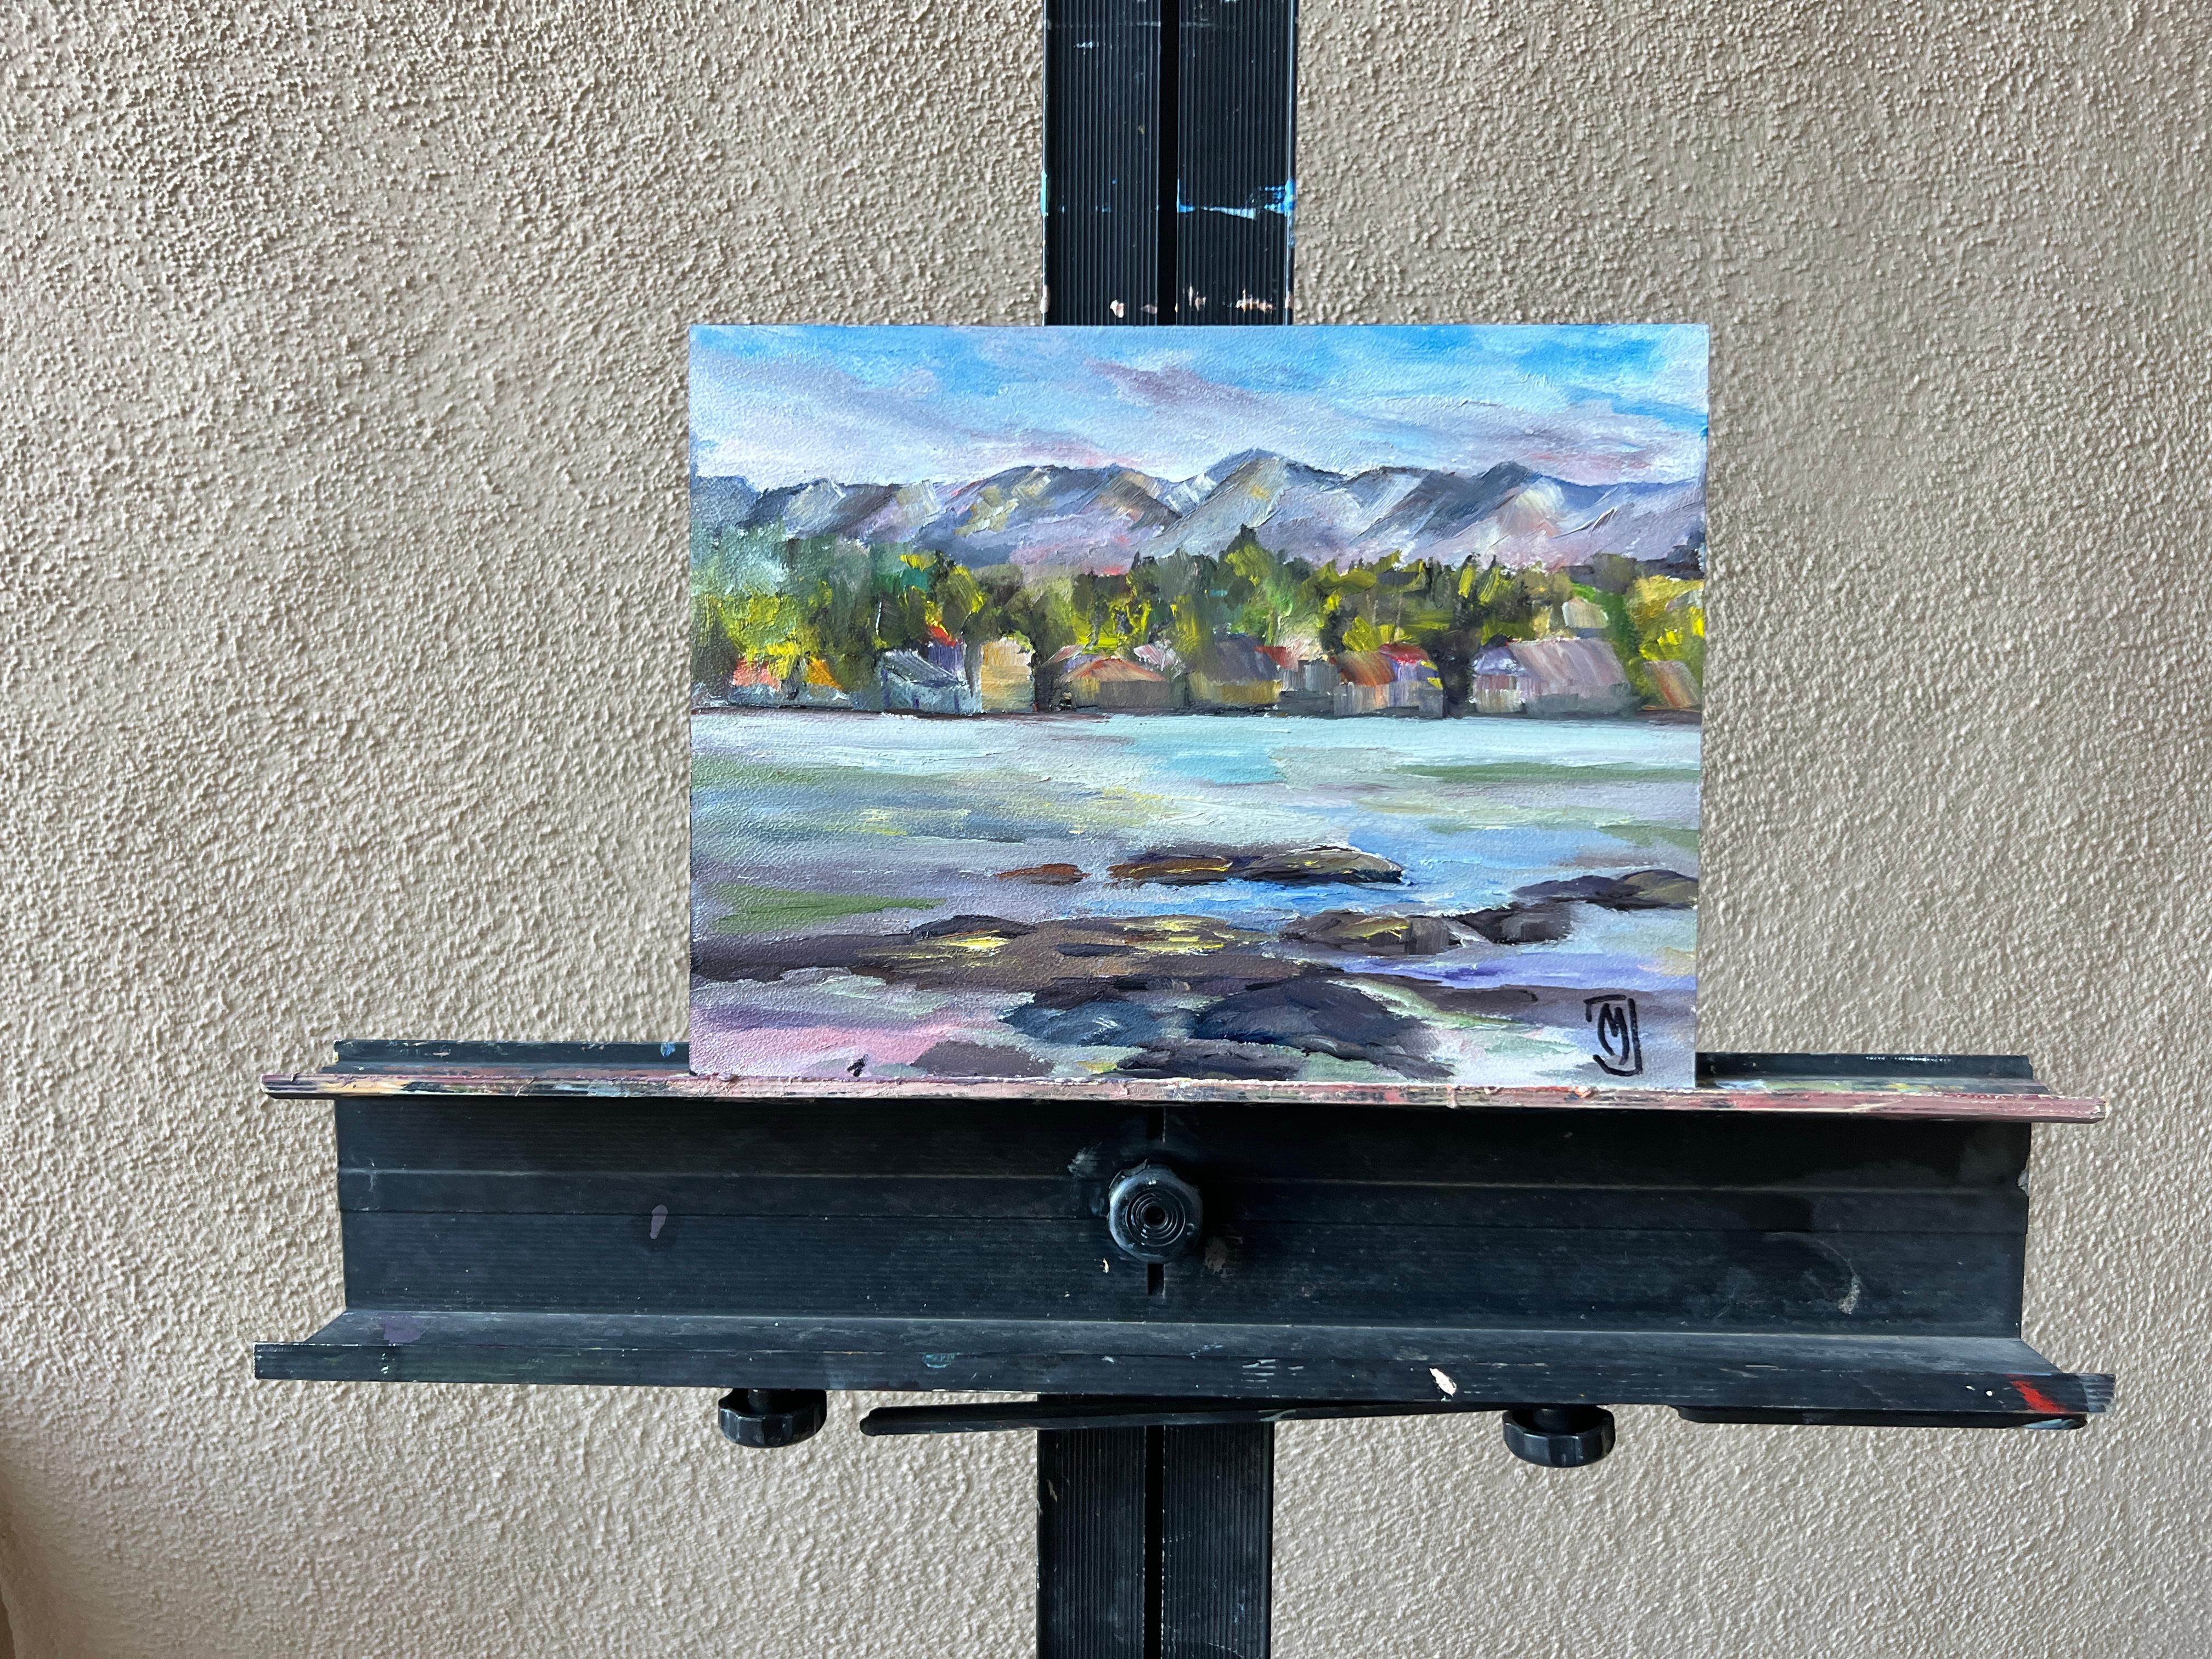 <p>Artist Comments<br>Painted outdoors at Wayfarers Park, artist Marilyn Froggatt pictures a location on Flathead Lake, Montana. The beautiful park near Big Fork sits scenically in view. Painted early in the morning, the eastern sunrise lights up